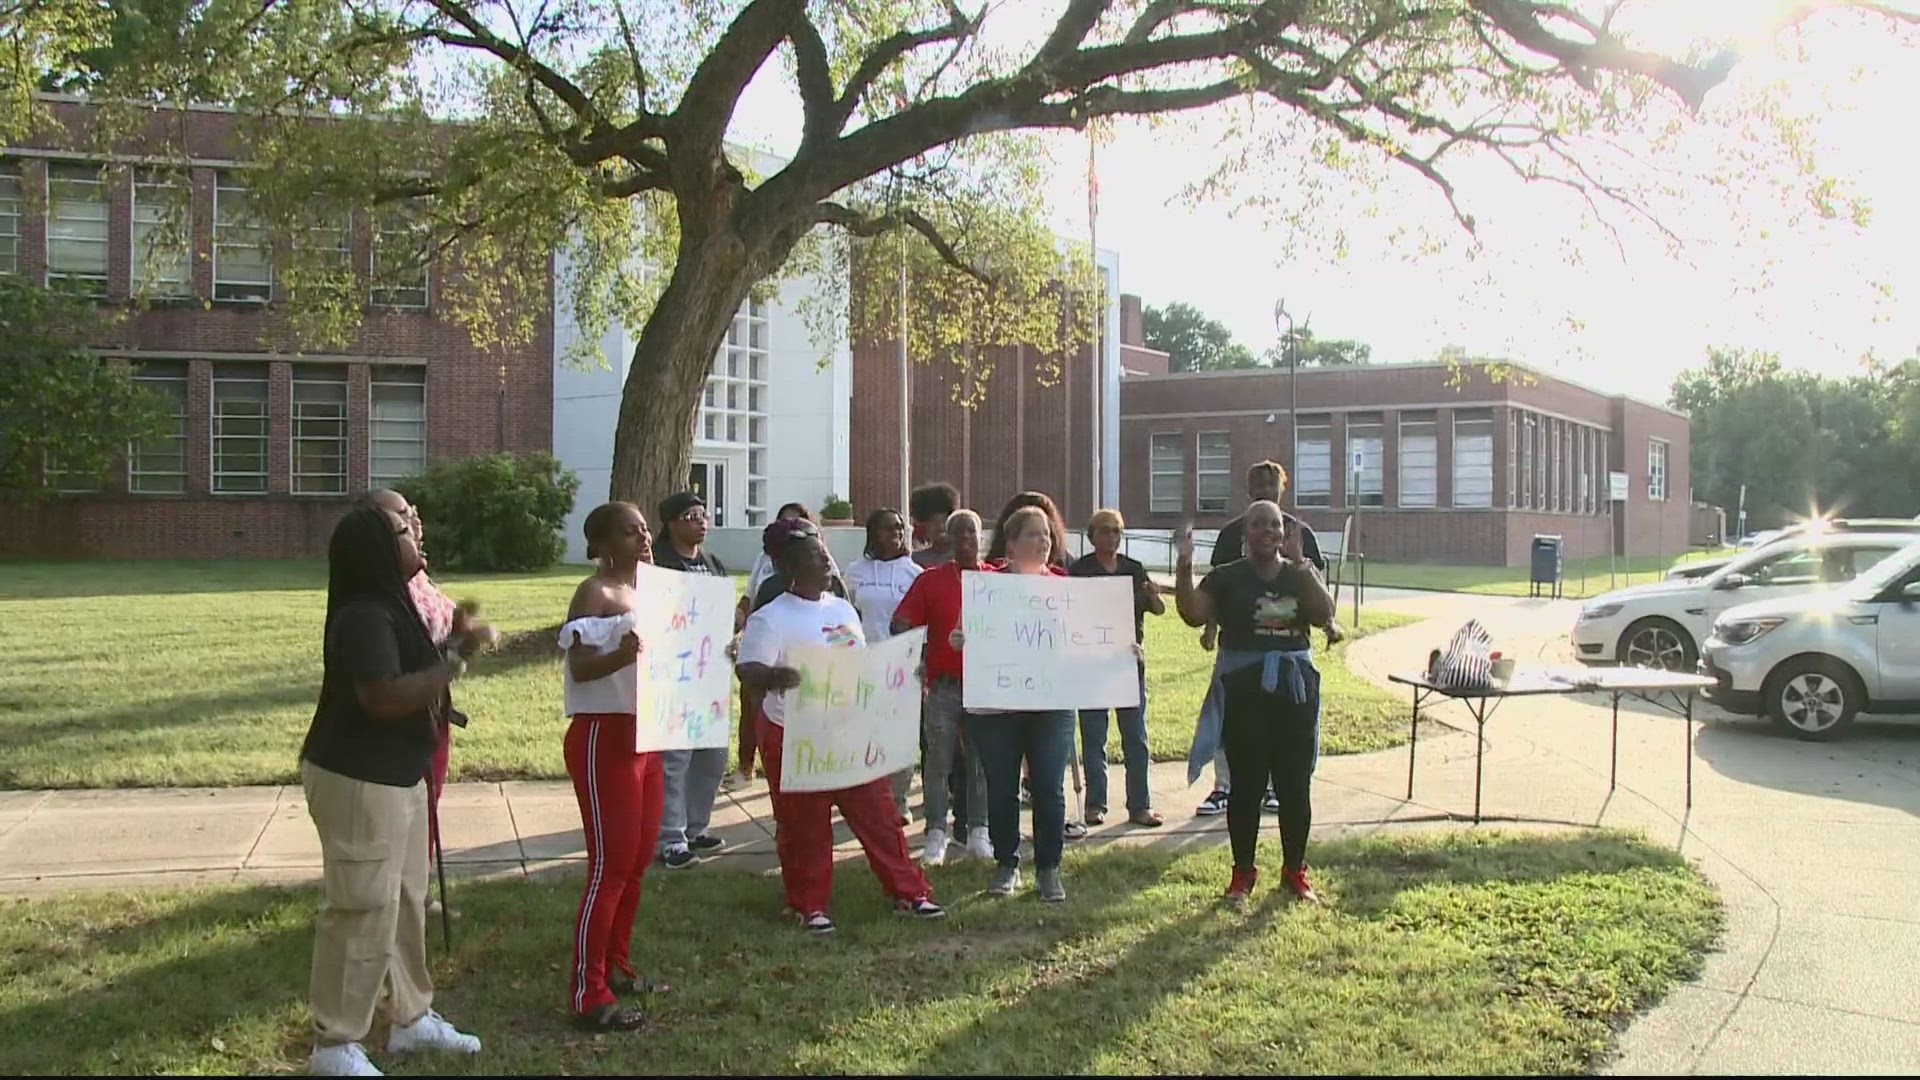 Safe Teach 23 is rallying outside a school board meeting Wednesday to seek more support.